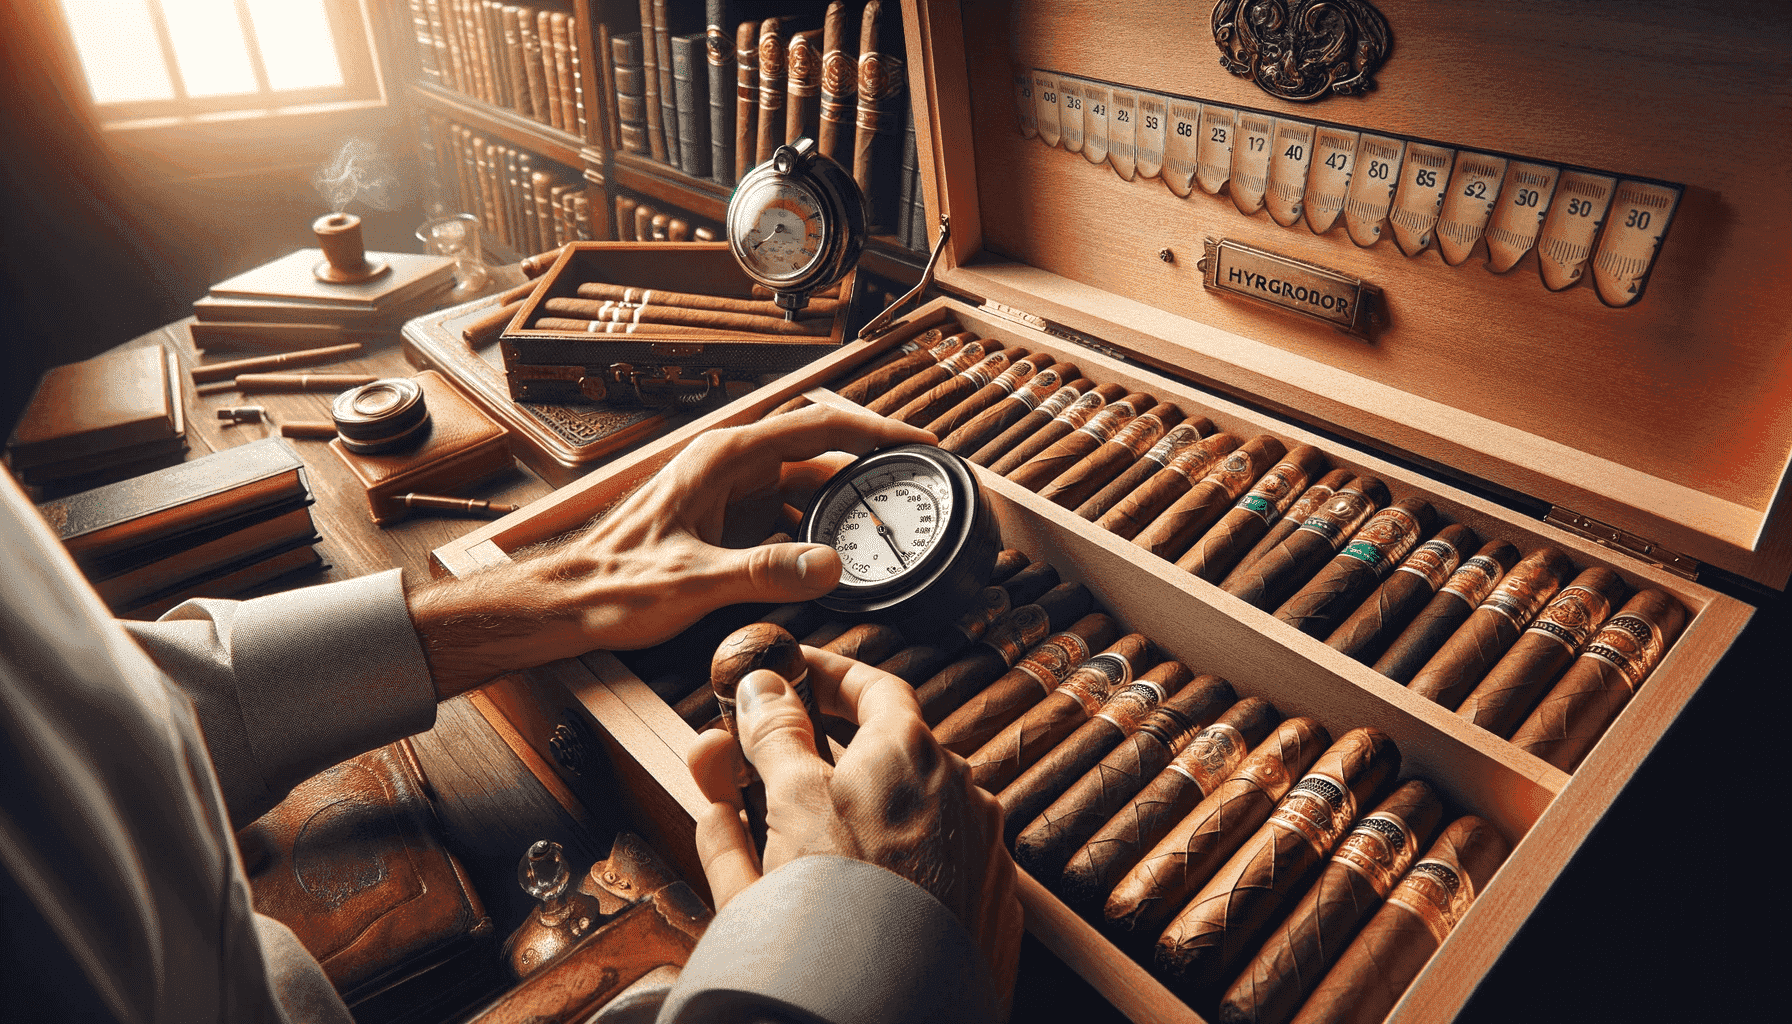 How To Maintain A Humidor